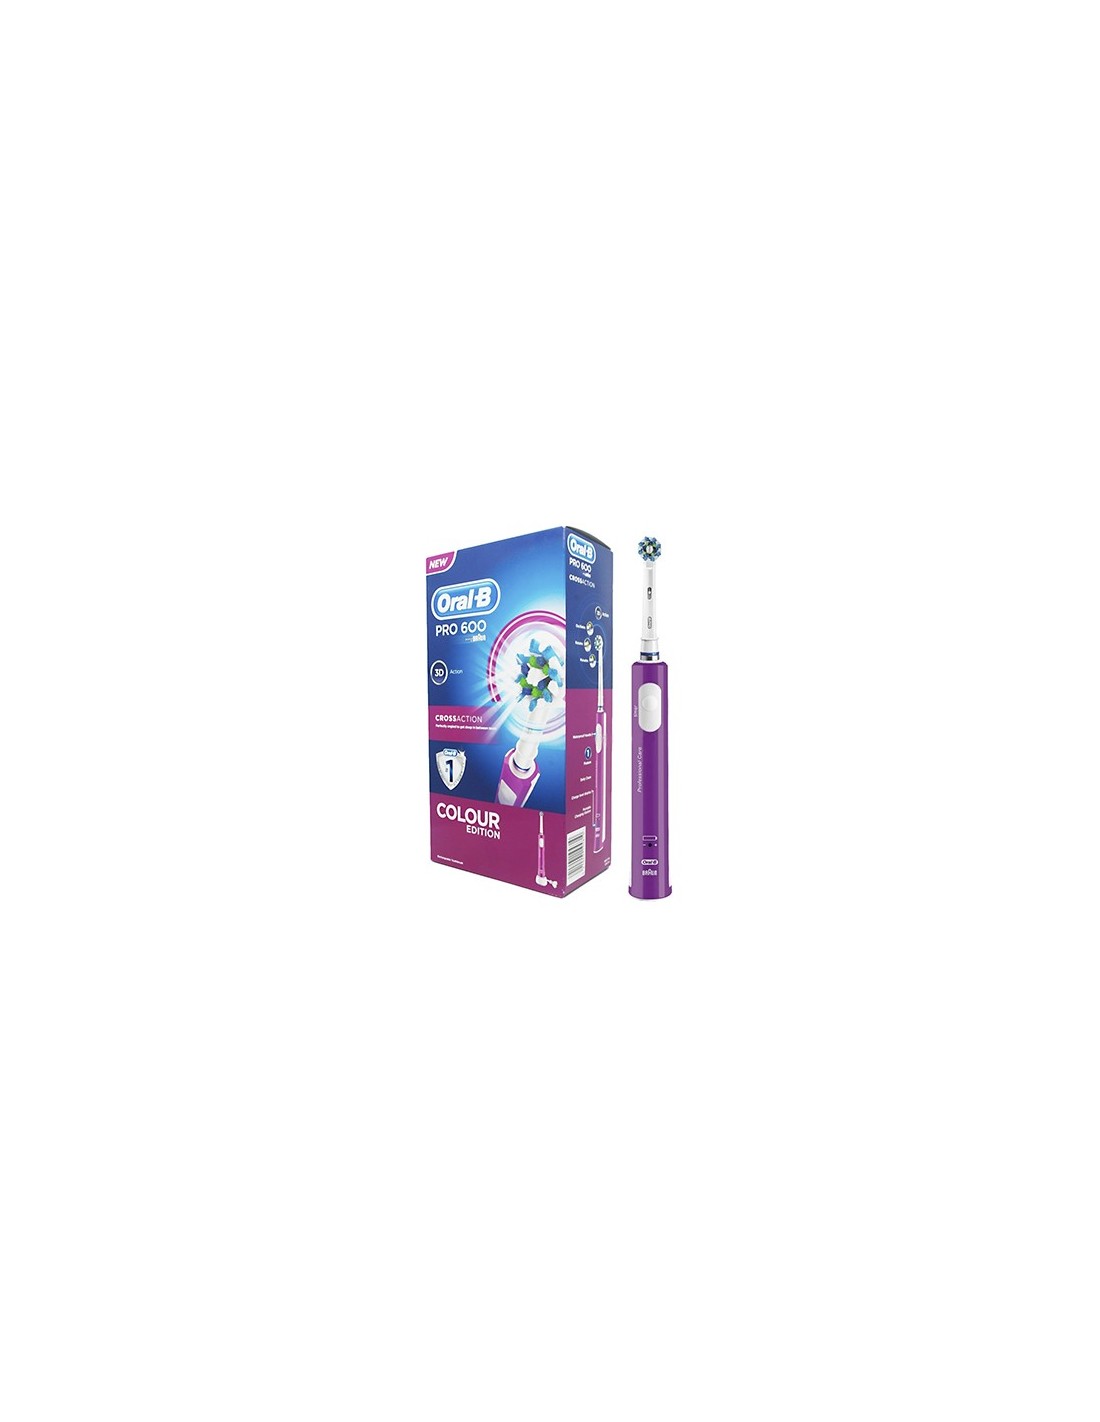 NEW Oral-B 600 Purple Power Pro 3D Cross Action Toothbrush Women Limited Edition 1ud